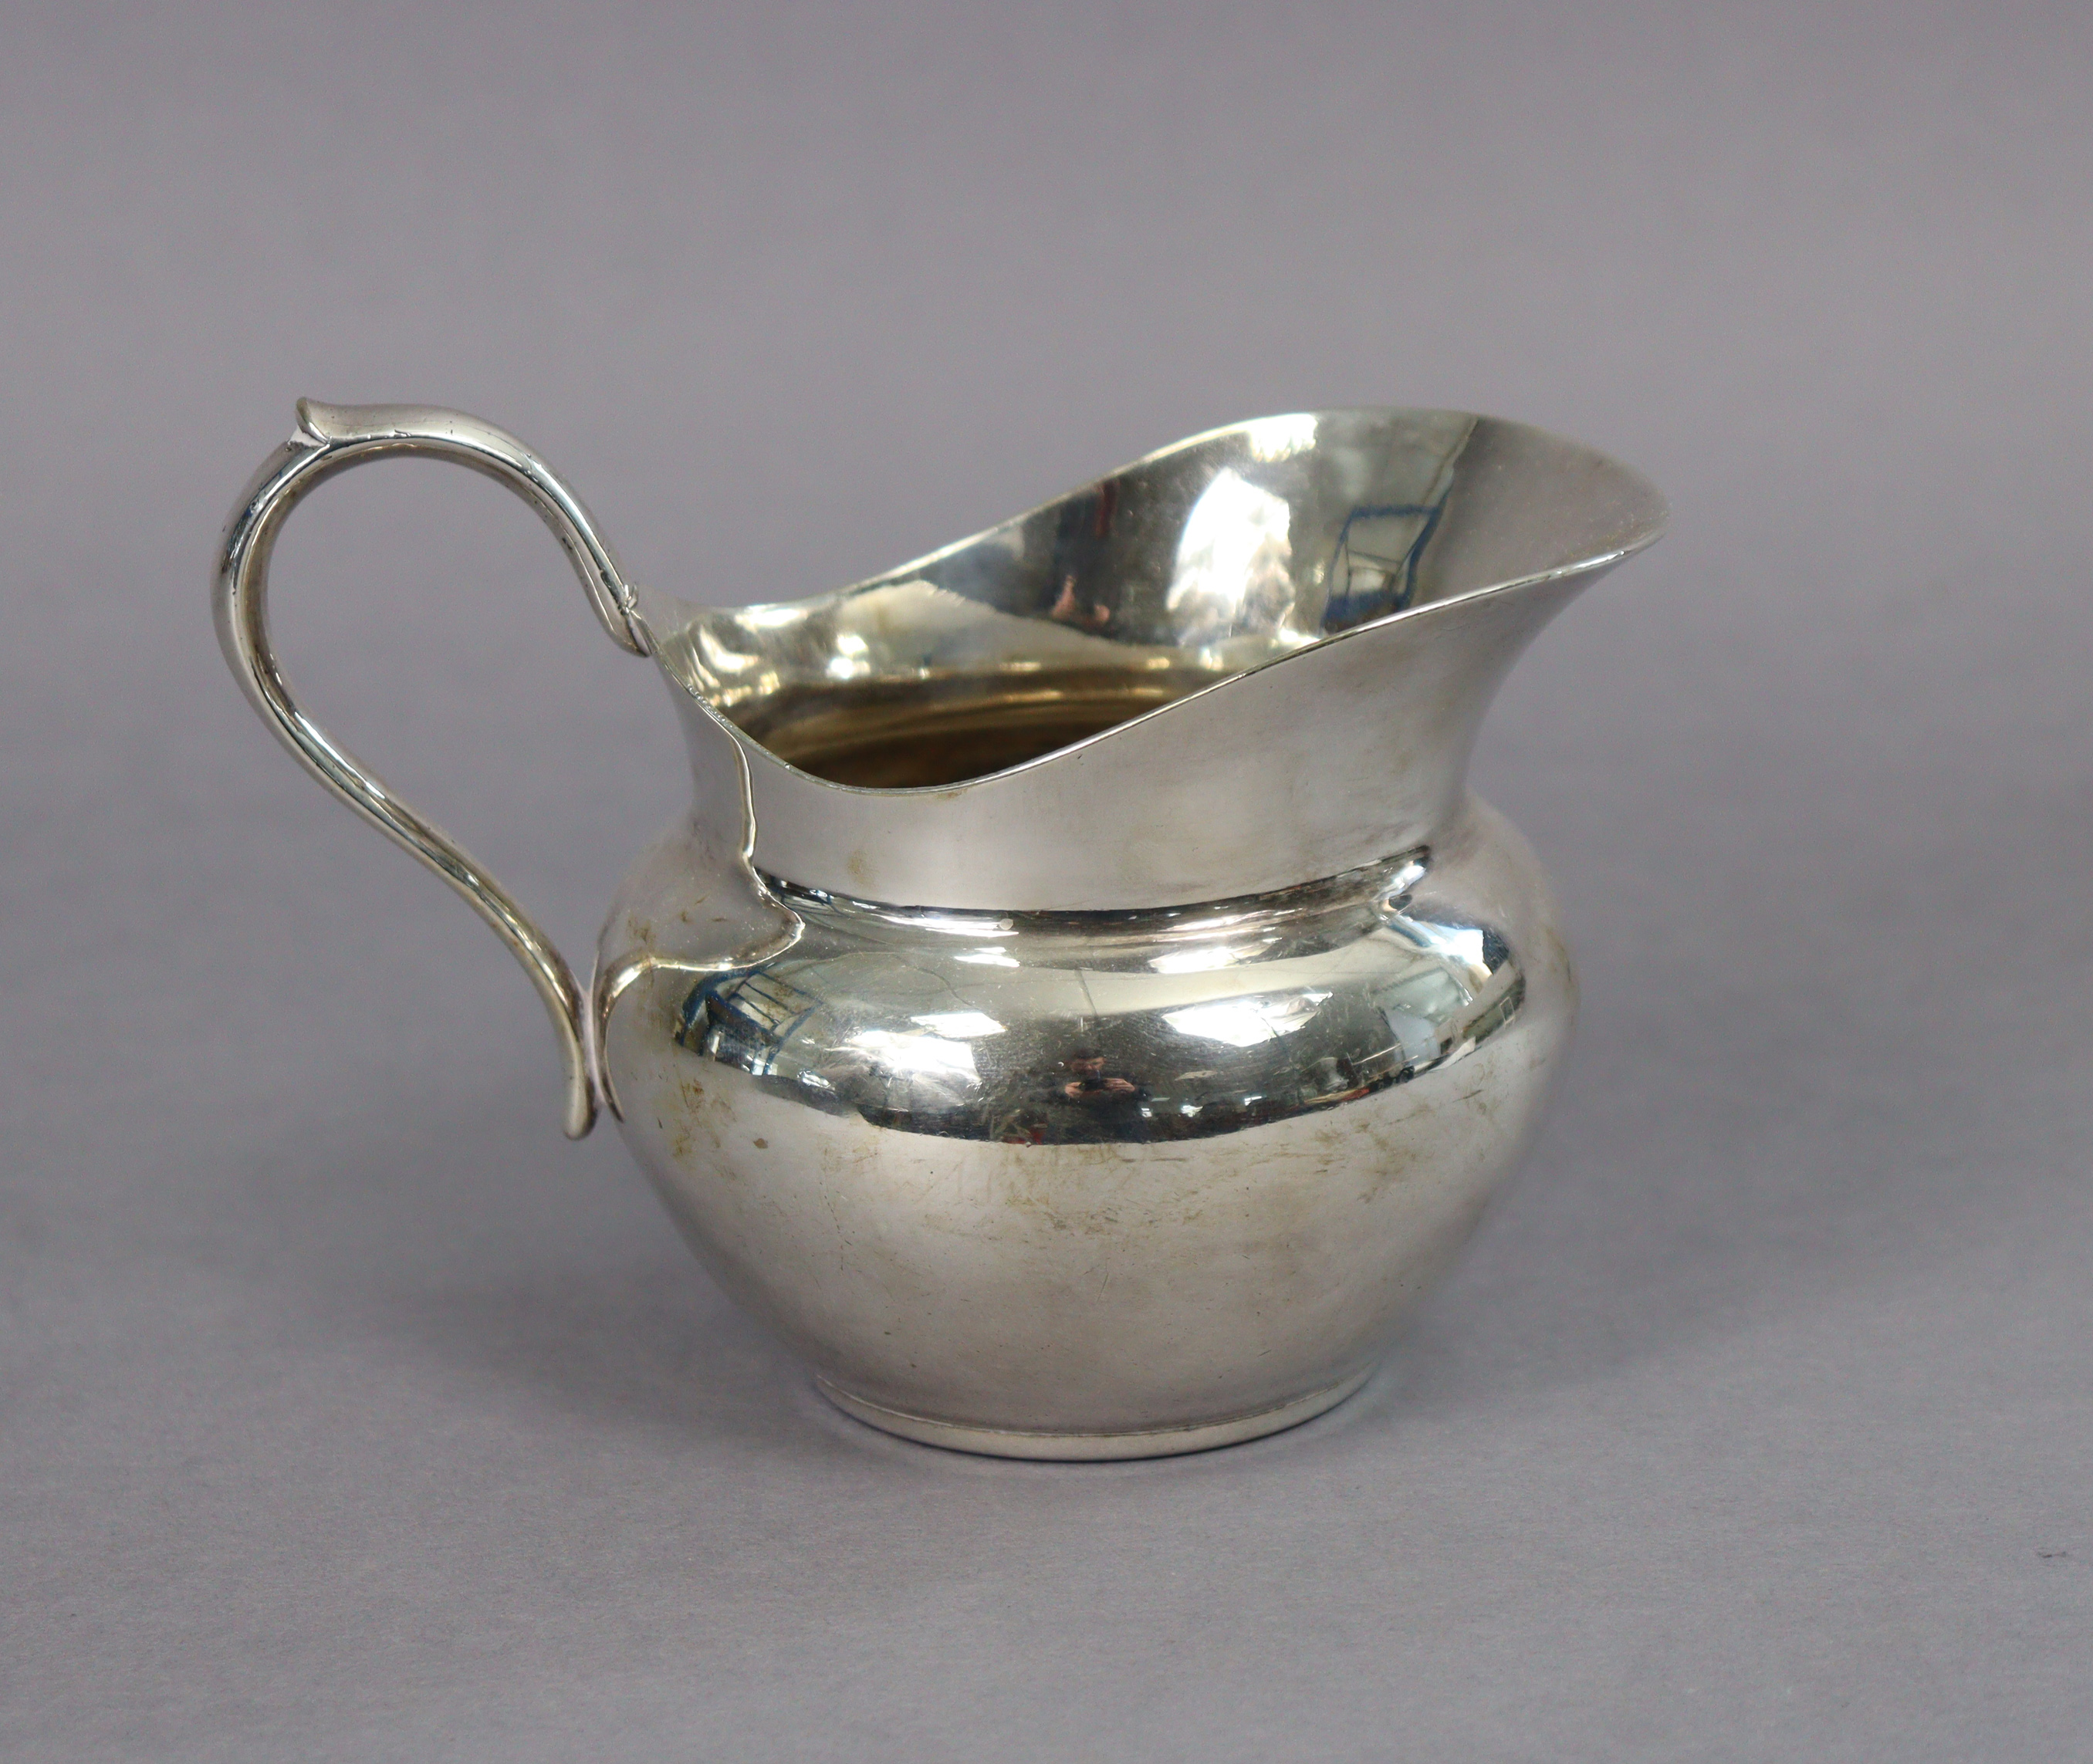 An early 20th century Christofle silver-plated cream jug of ovoid form, with scroll handle & wide